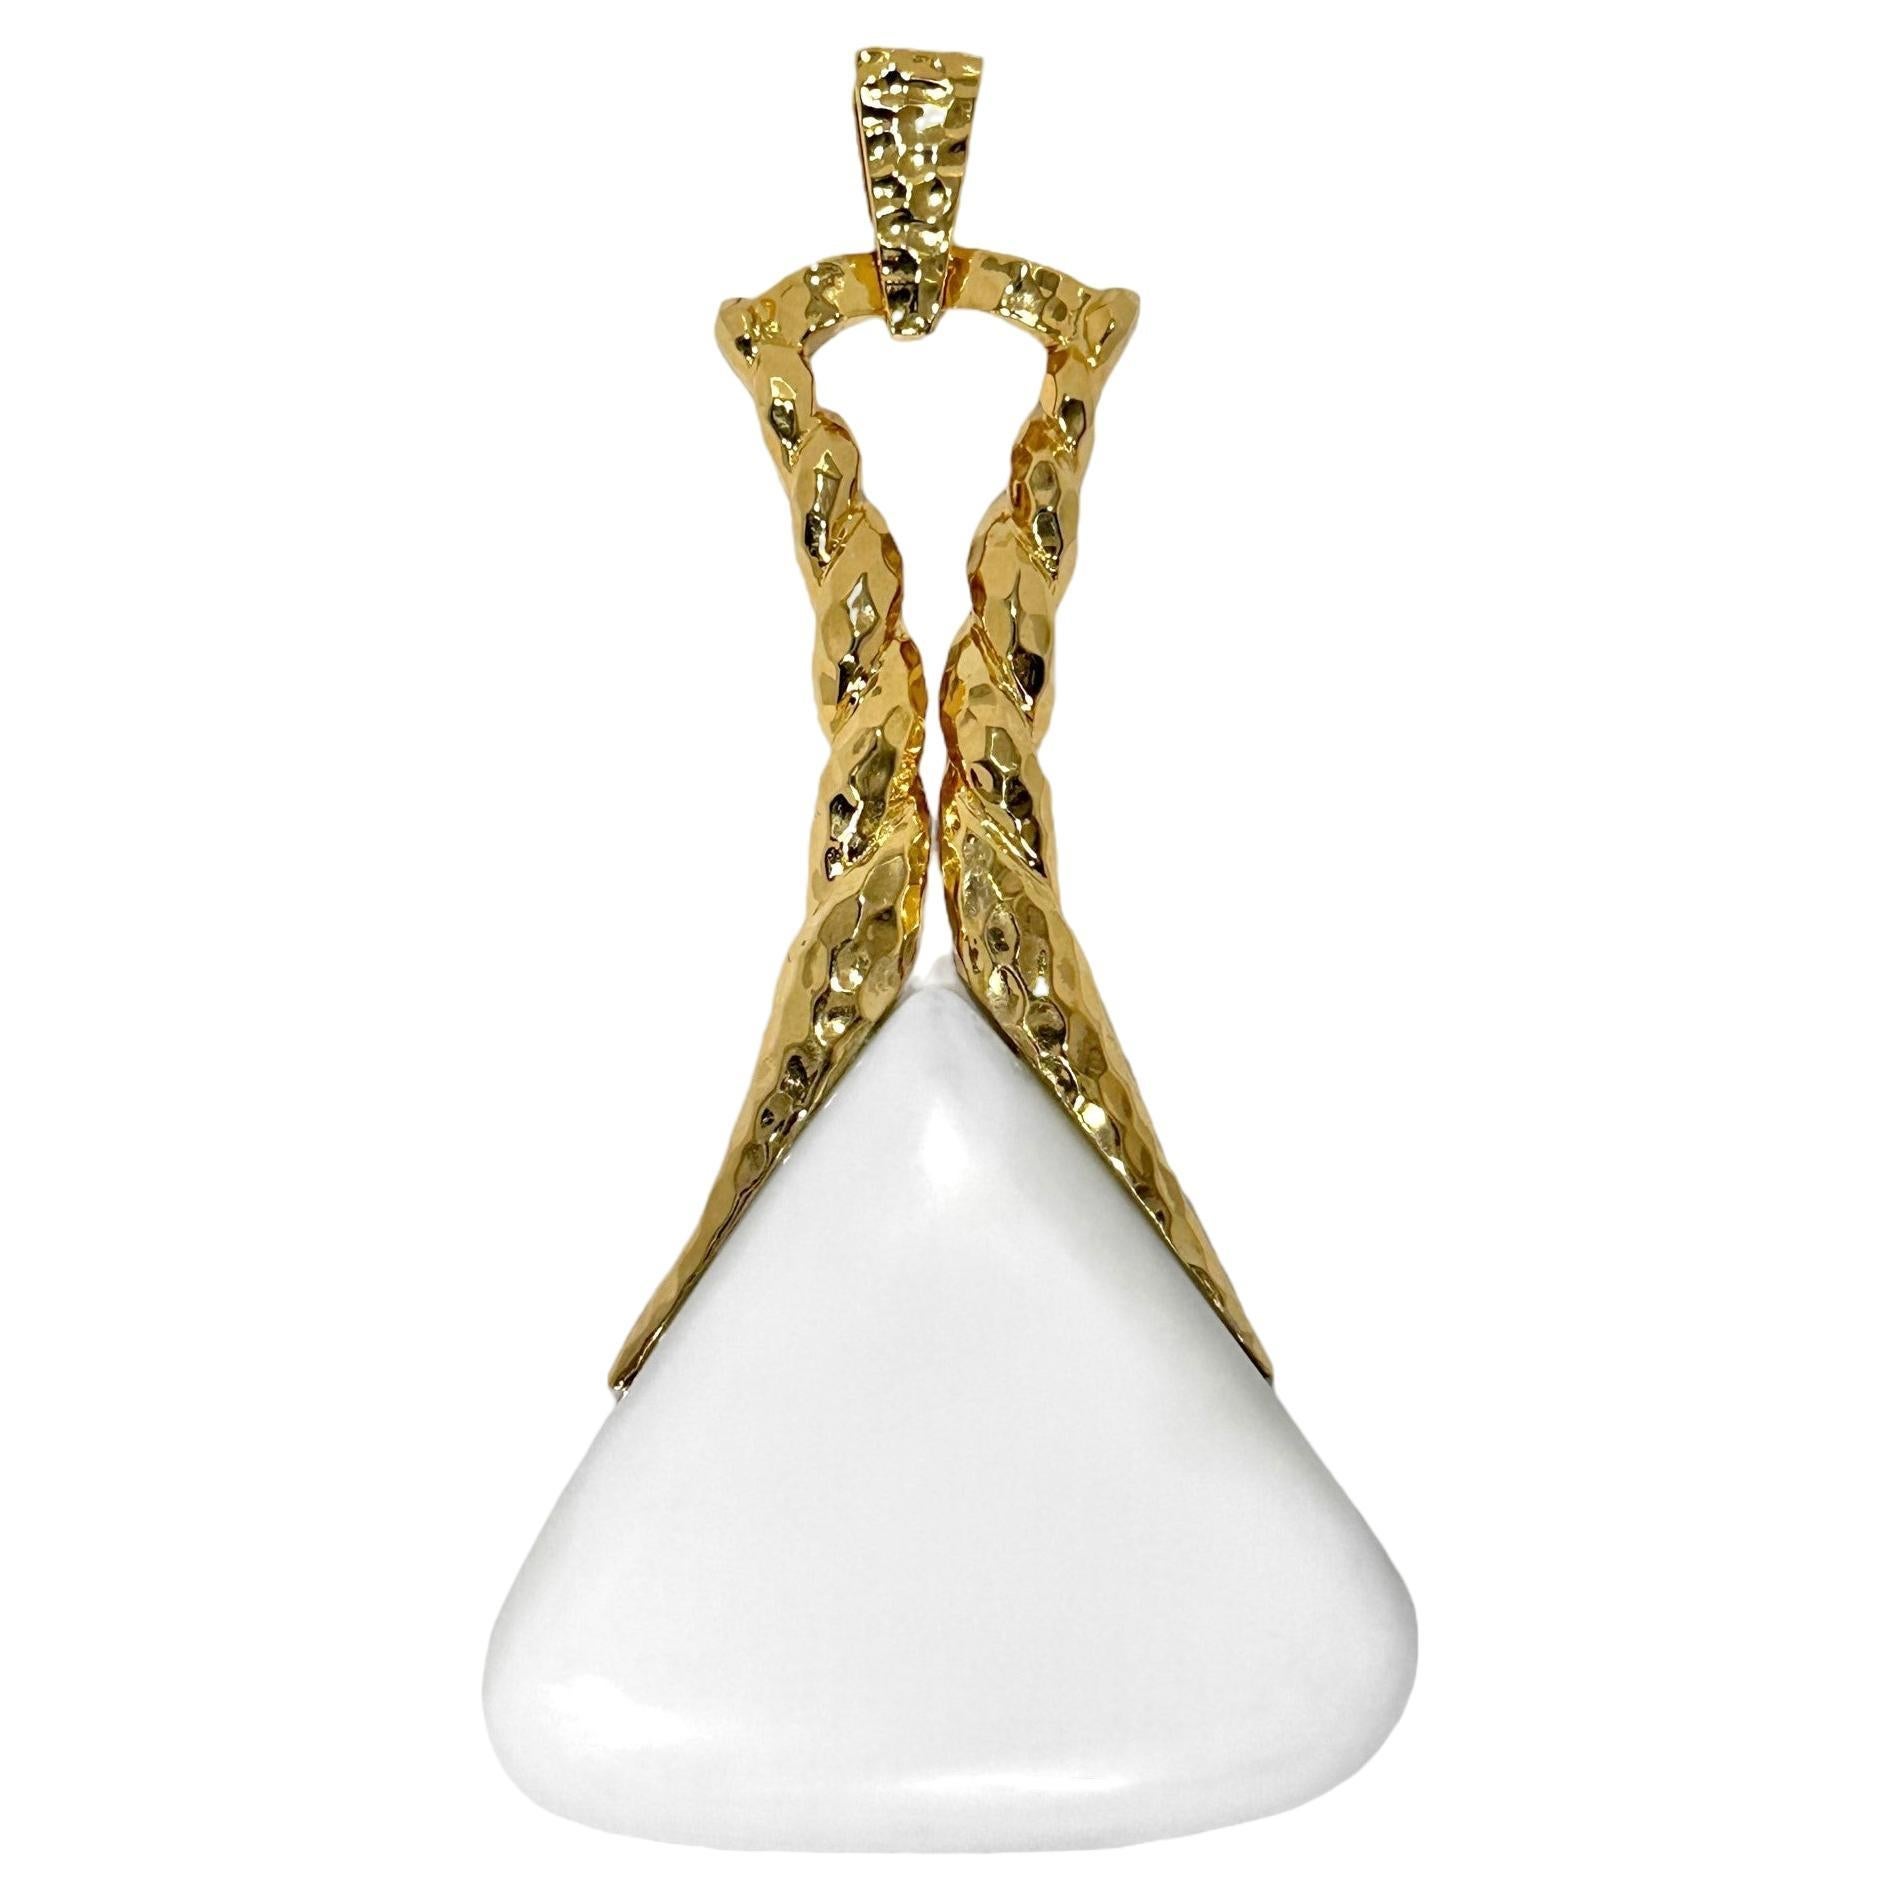 Large, French, Hammered Gold and White Onyx Pendant 4 3/8 Inches Long by Wander For Sale